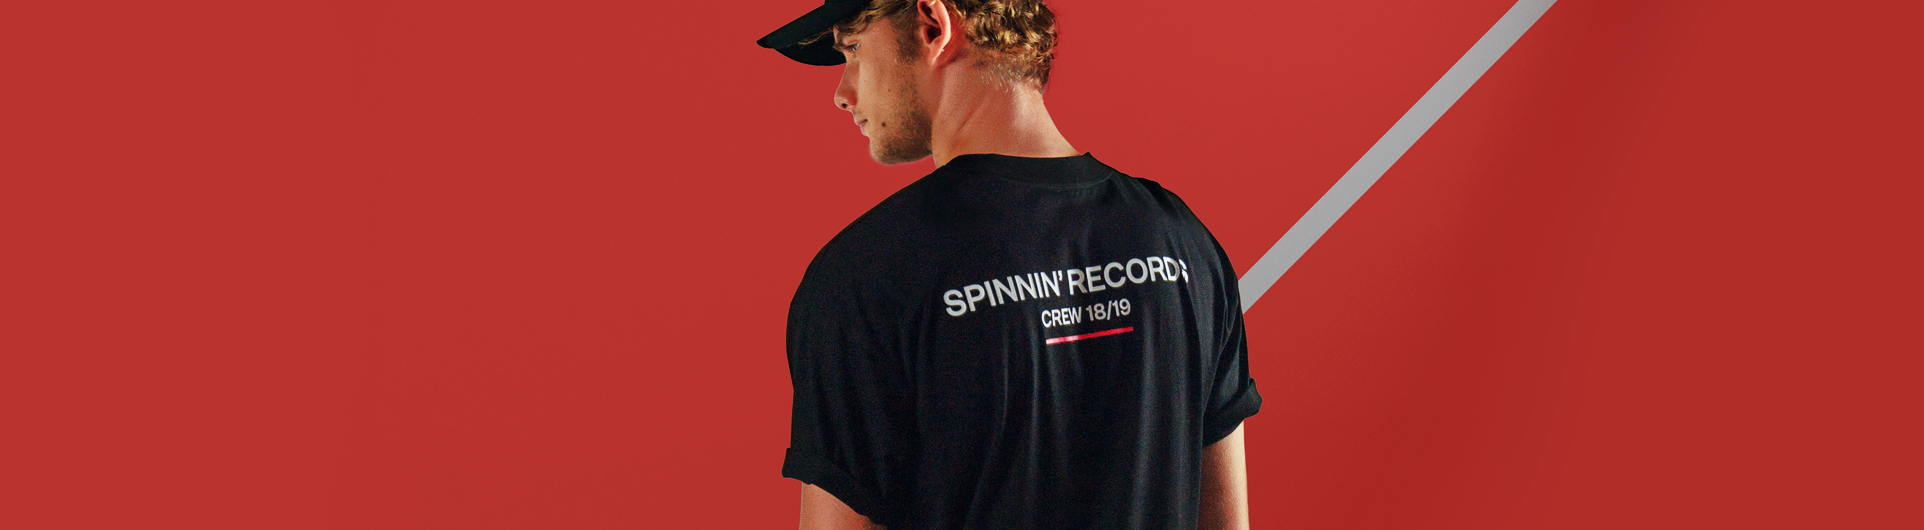 Check out Spinnin's new online shop